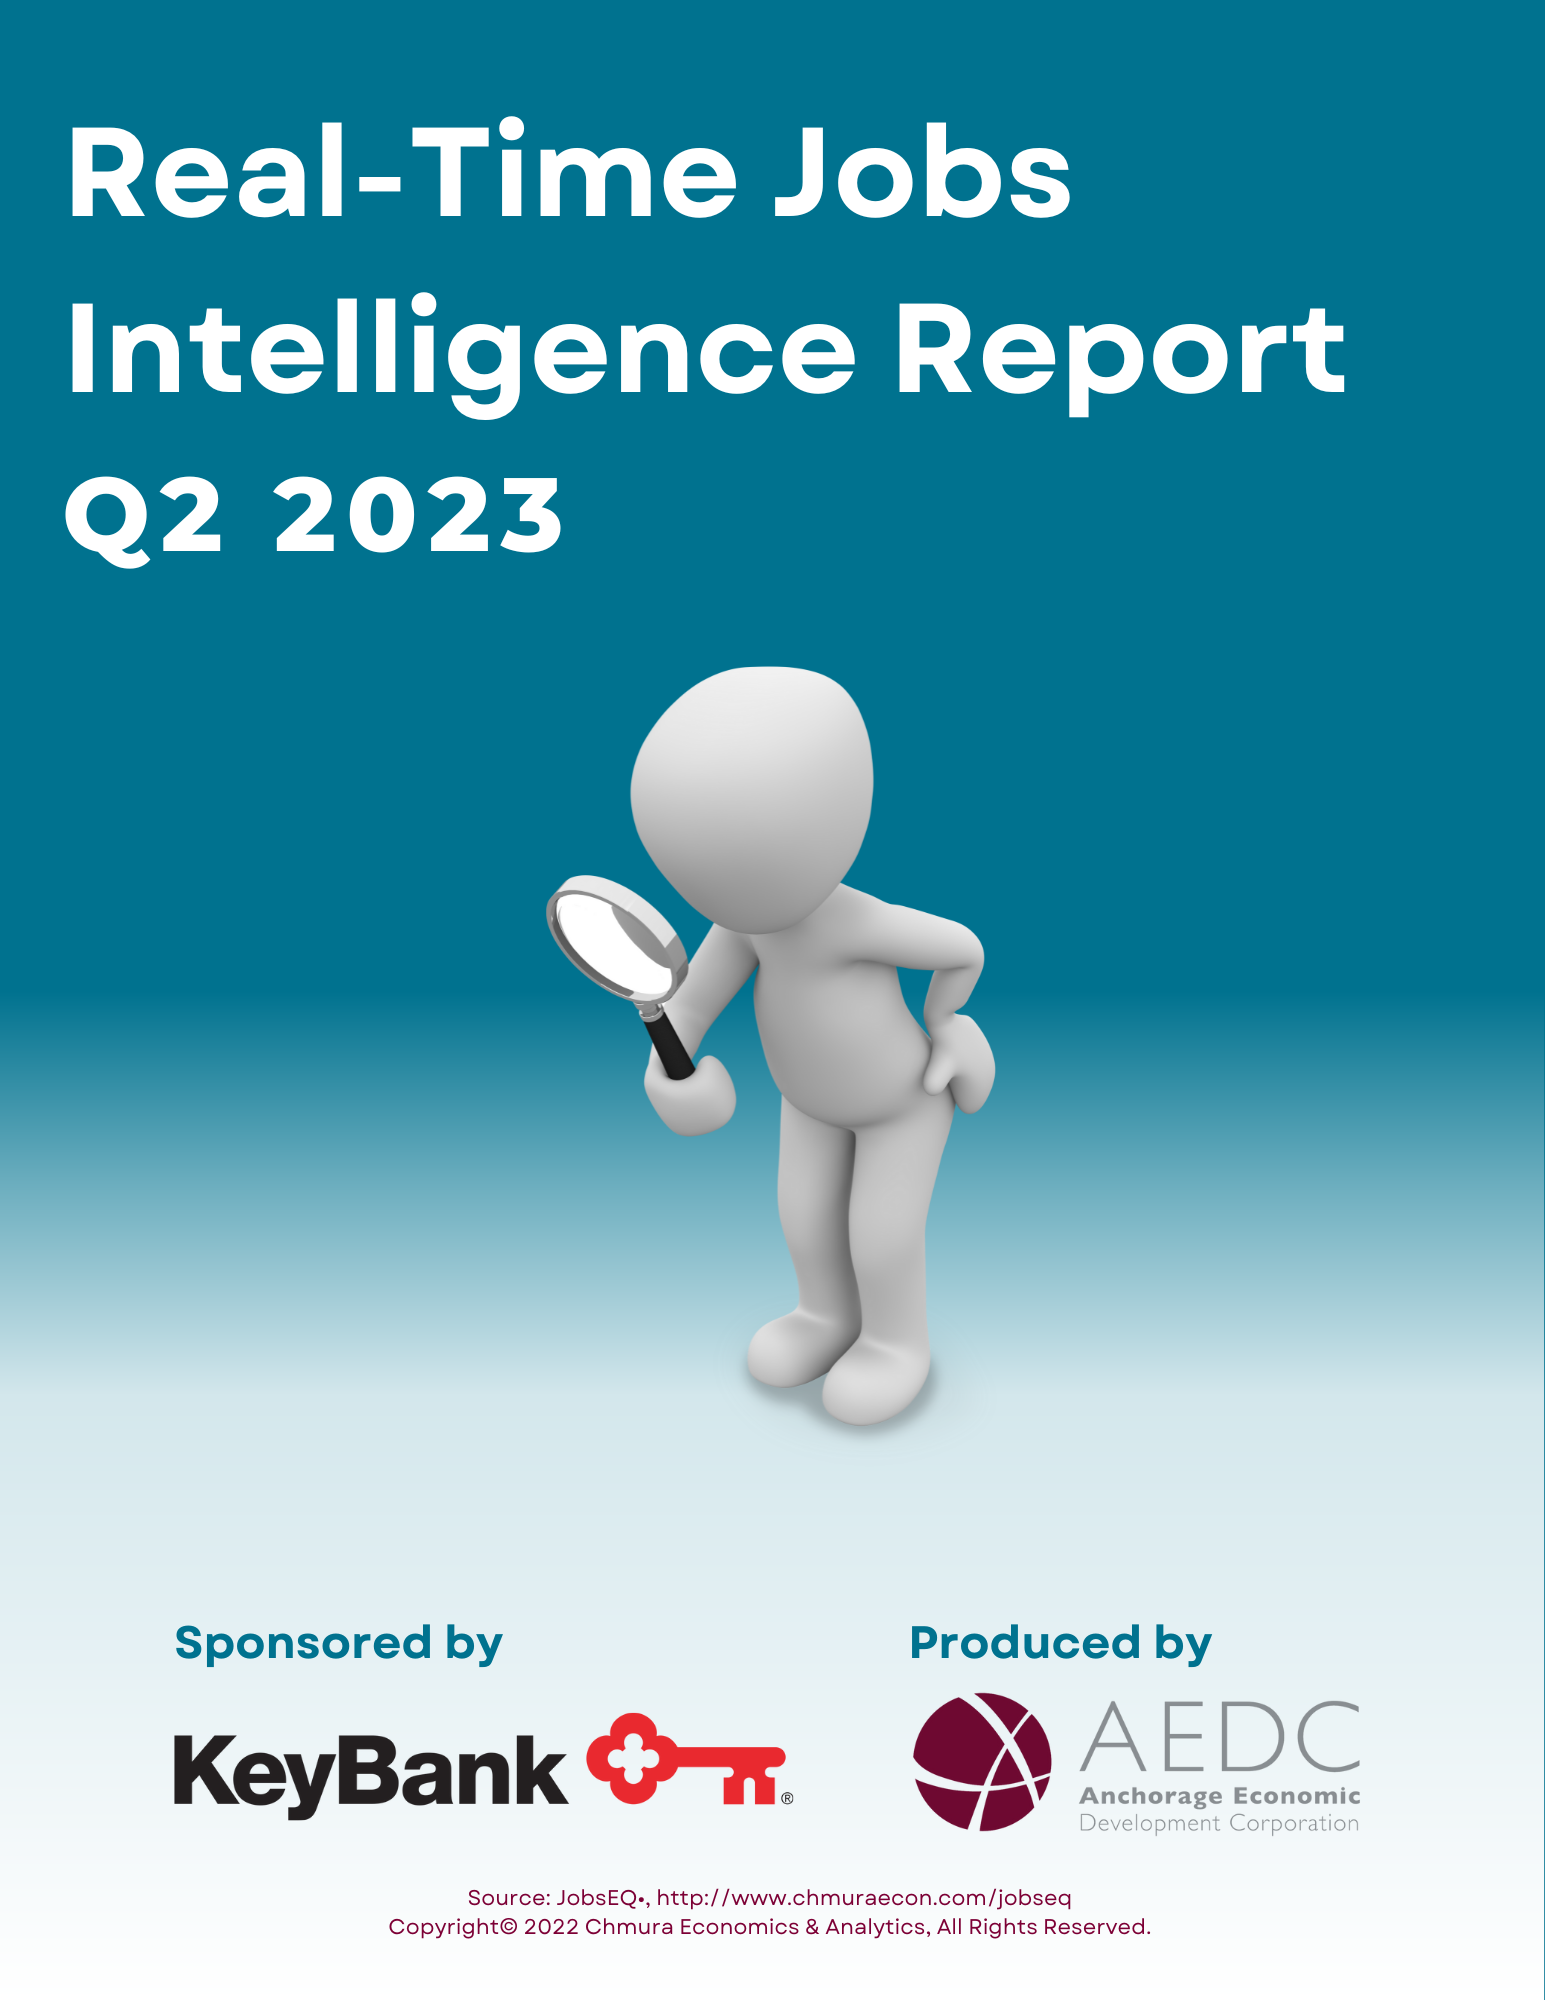 Real-Time Jobs Intelligence Report 2023, Q2